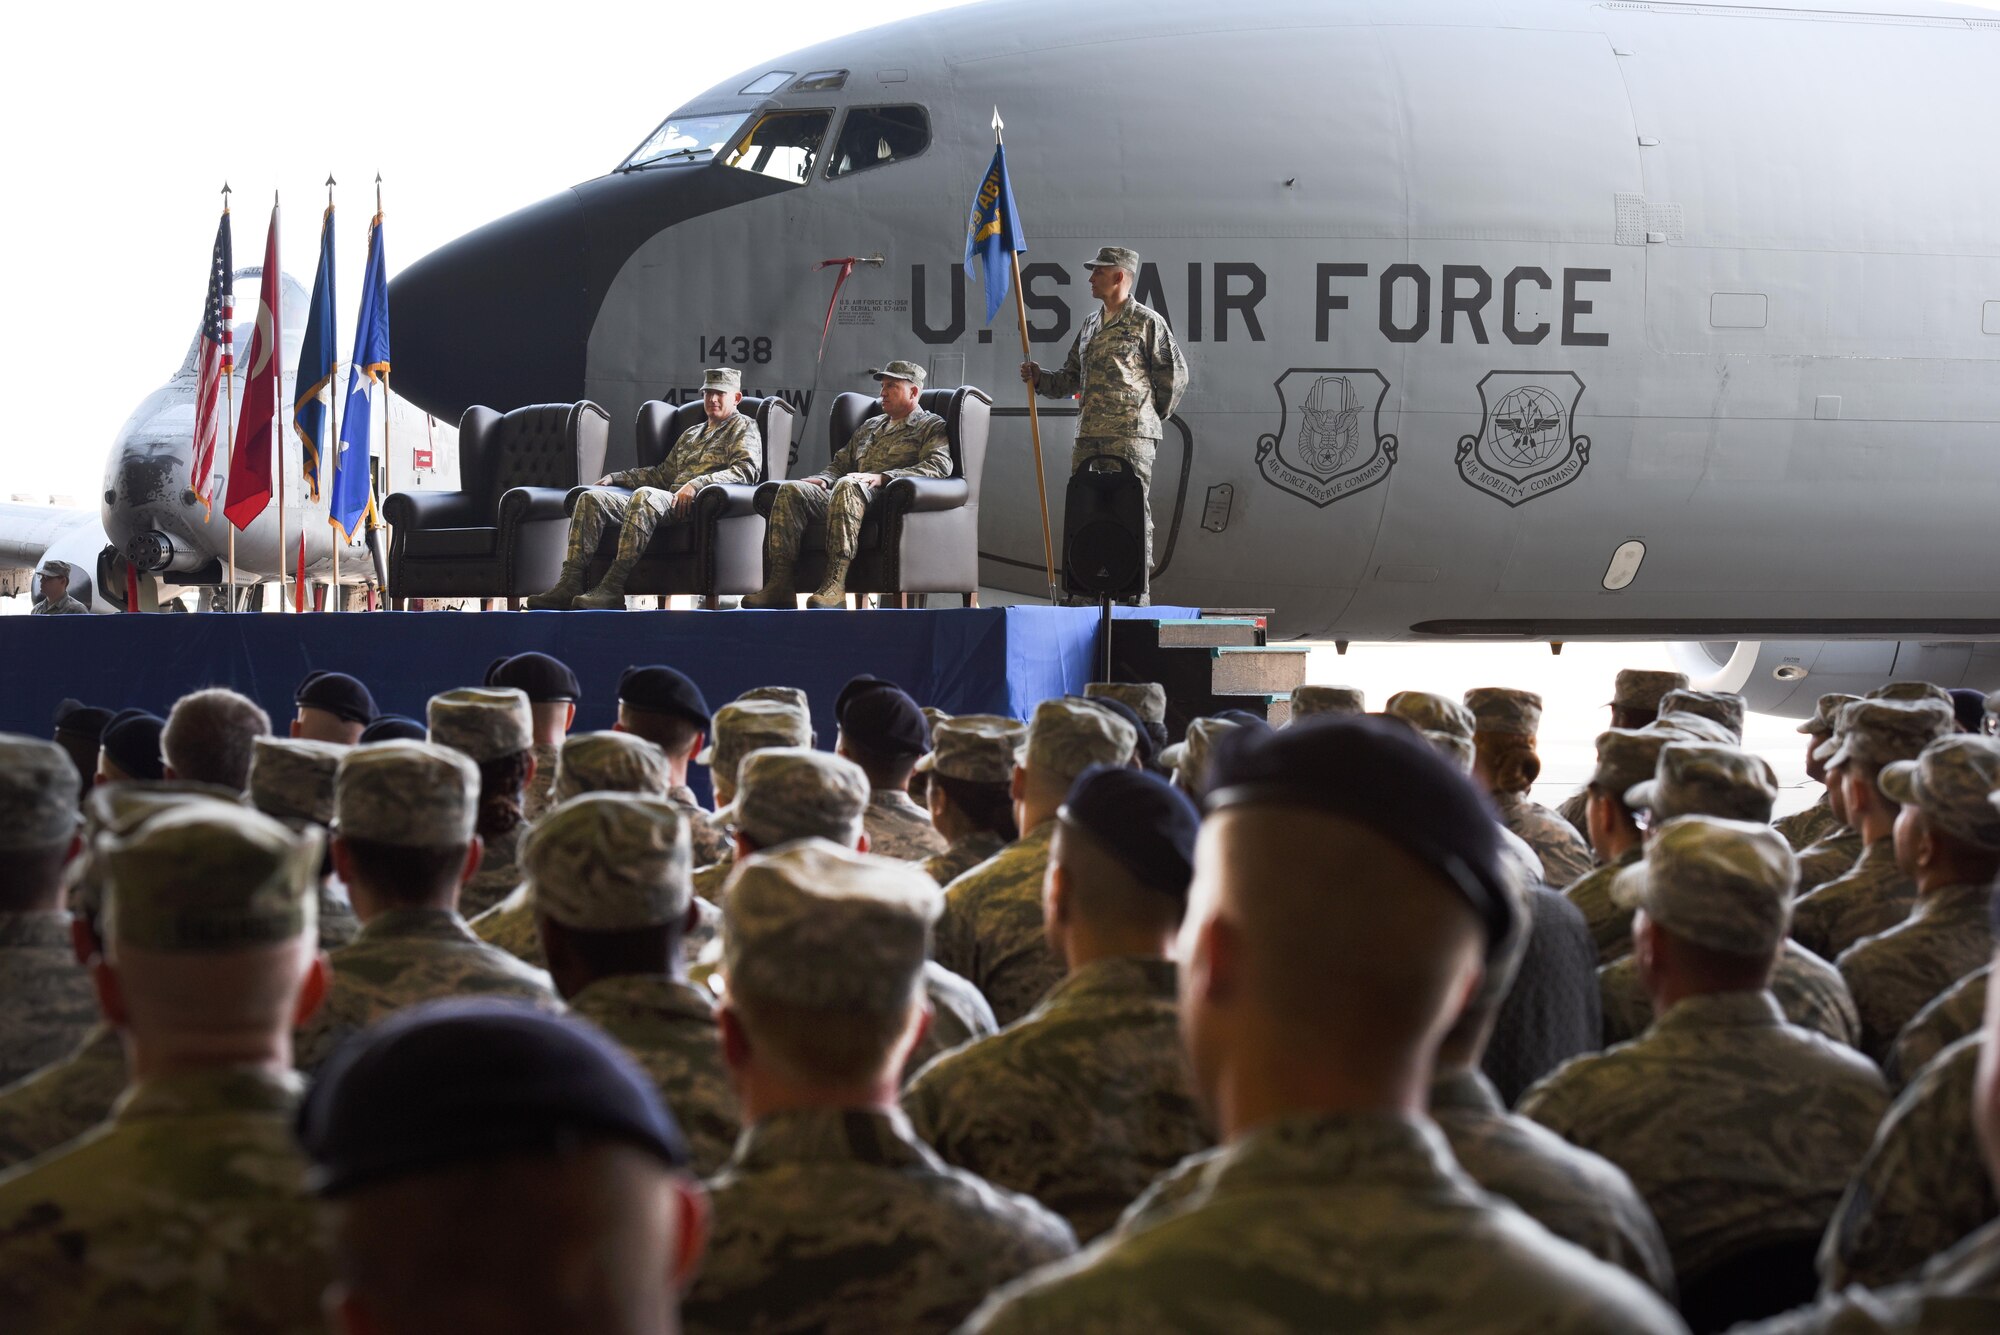 A crowd watches as Col David Eaglin assumes command of the 39th Air Base Wing June 1, 2017, at Incirlik Air Base, Turkey. Eaglin will be responsible for approximately 5,000 U.S. personnel and the combat readiness of U.S. Air Force units at Incirlik. (U.S. Air Force photo by Airman 1st Class Kristan Campbell)